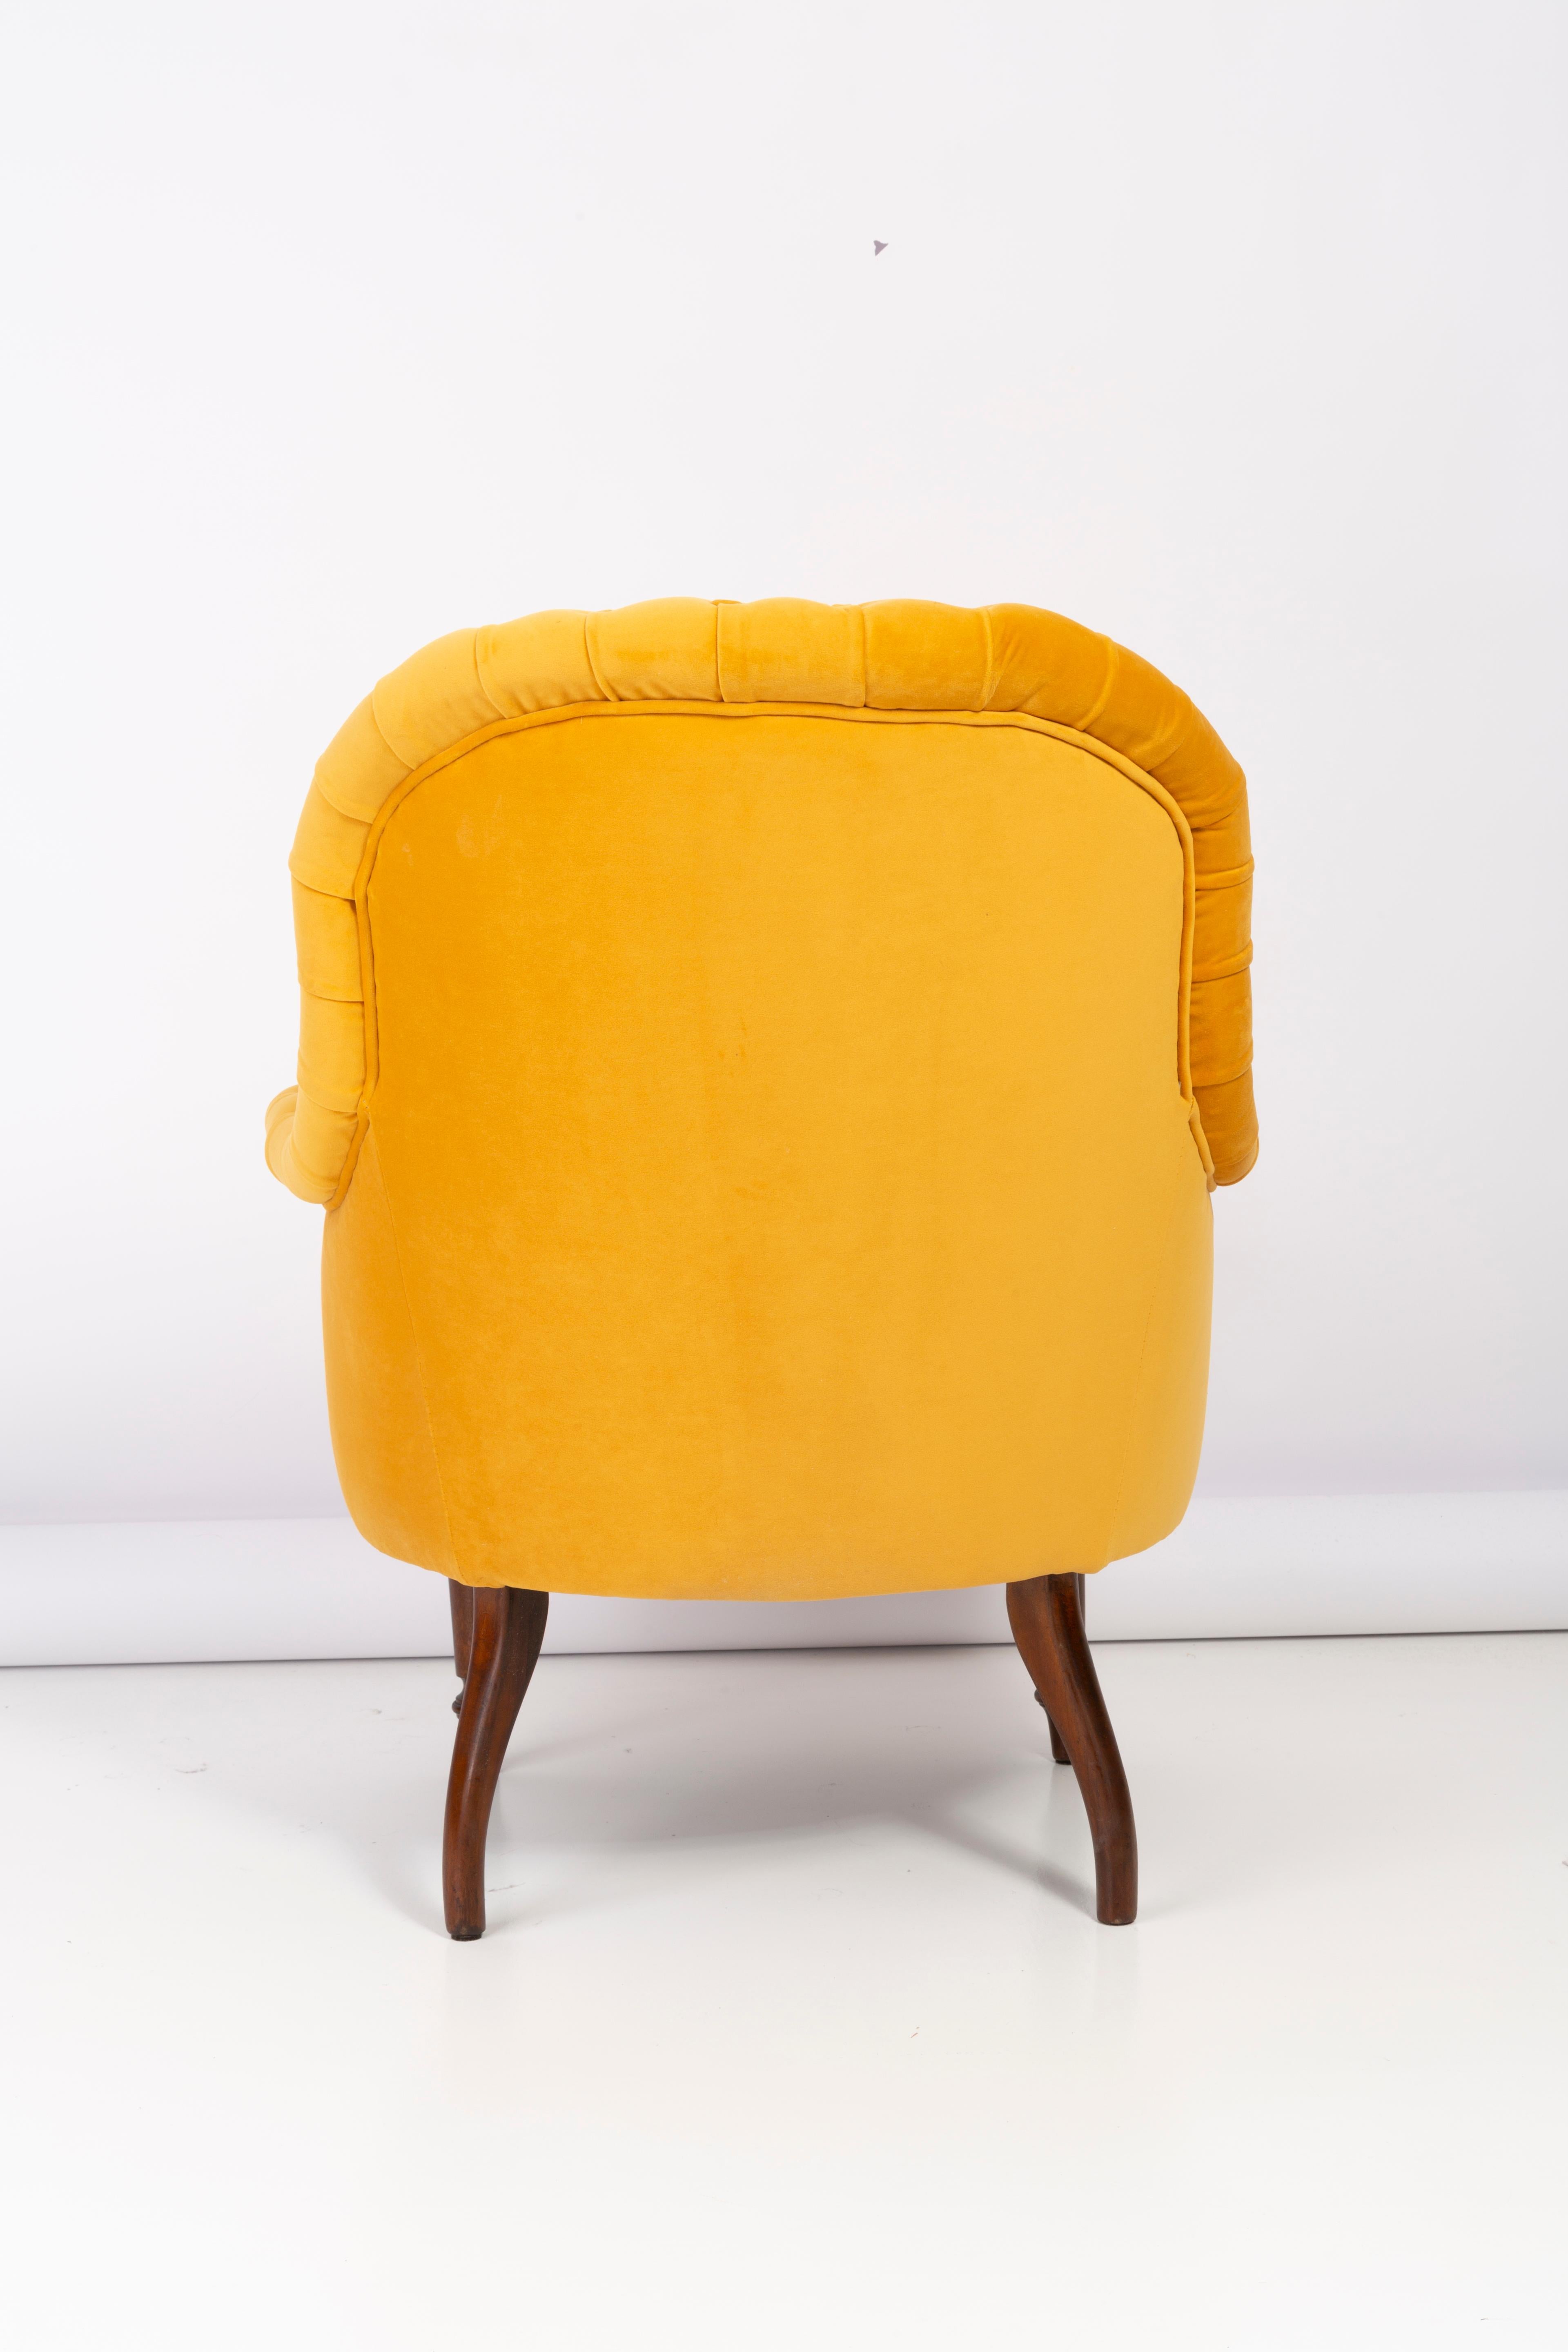 Unique Yellow Mustard Armchair, 1930s, Germany For Sale 3